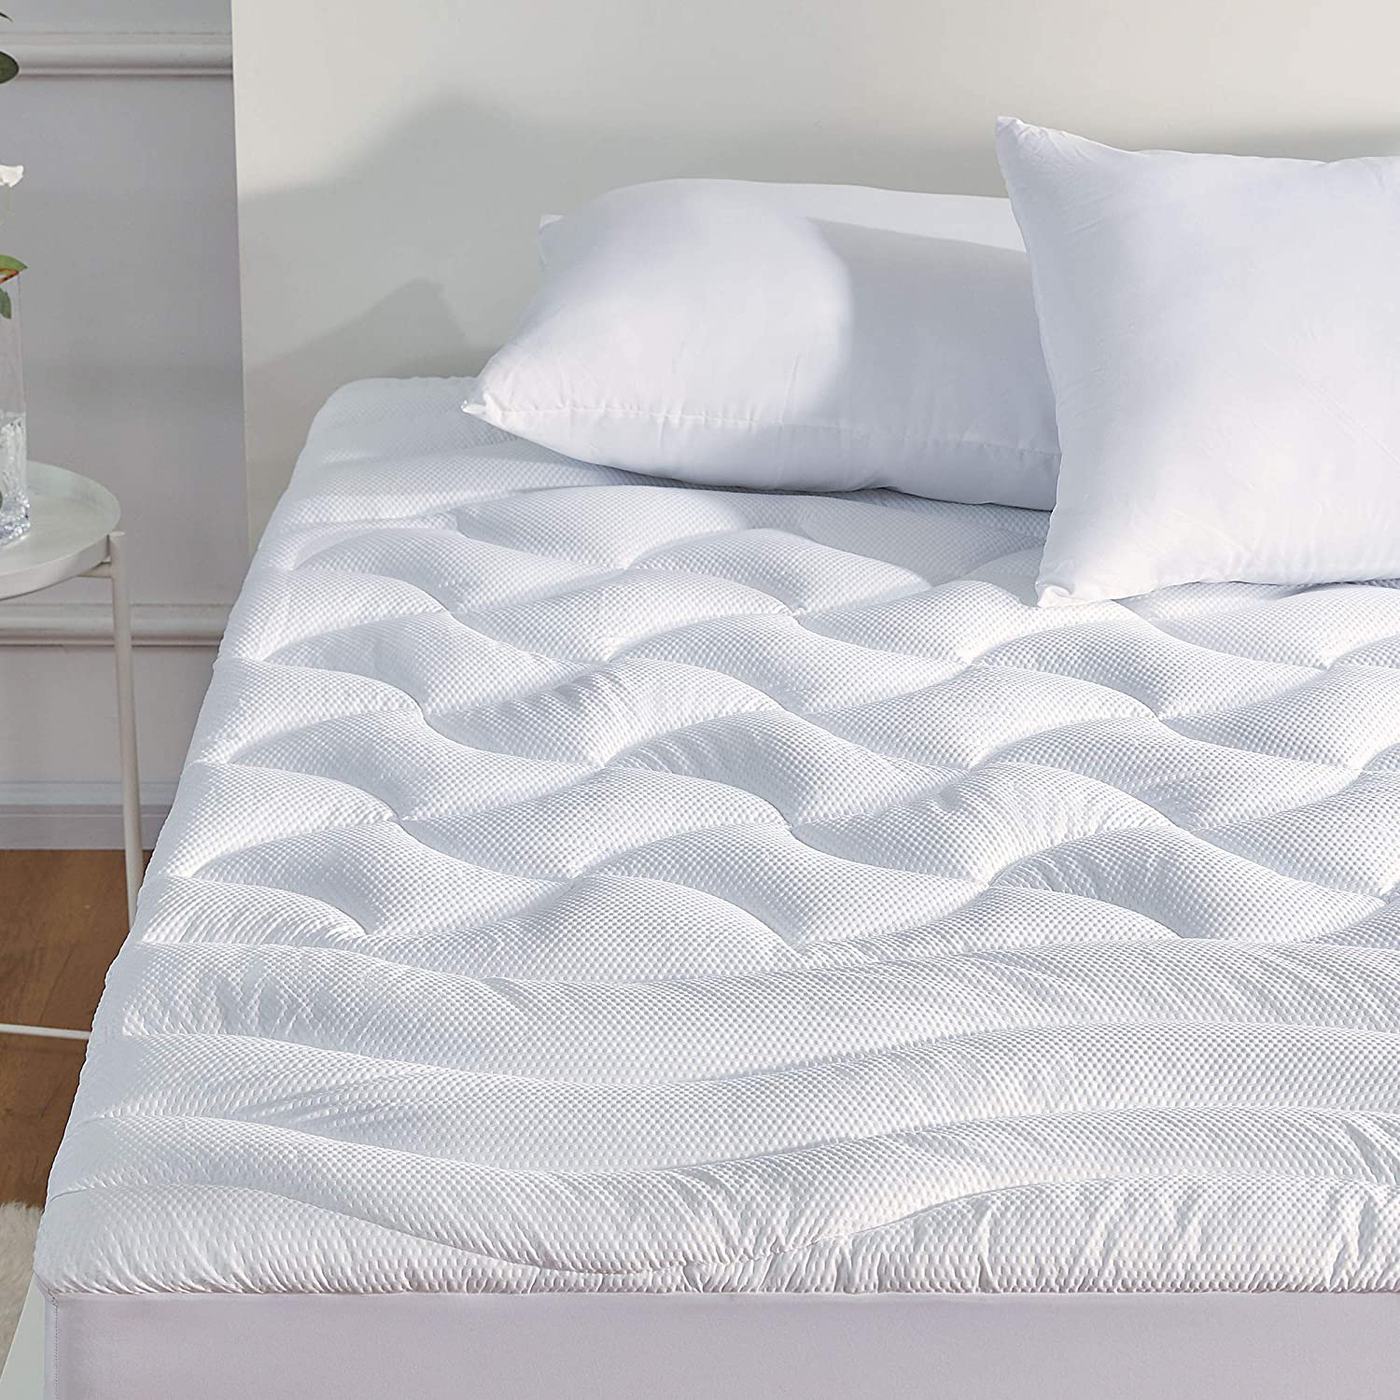 SLEEP ZONE Premium Mattress Pad Cover Cooling Overfilled Fluffy Soft Topper Zone Design Upto 21 inch Deep Pocket with Athletic Grade Elastic Skirt, White, Queen